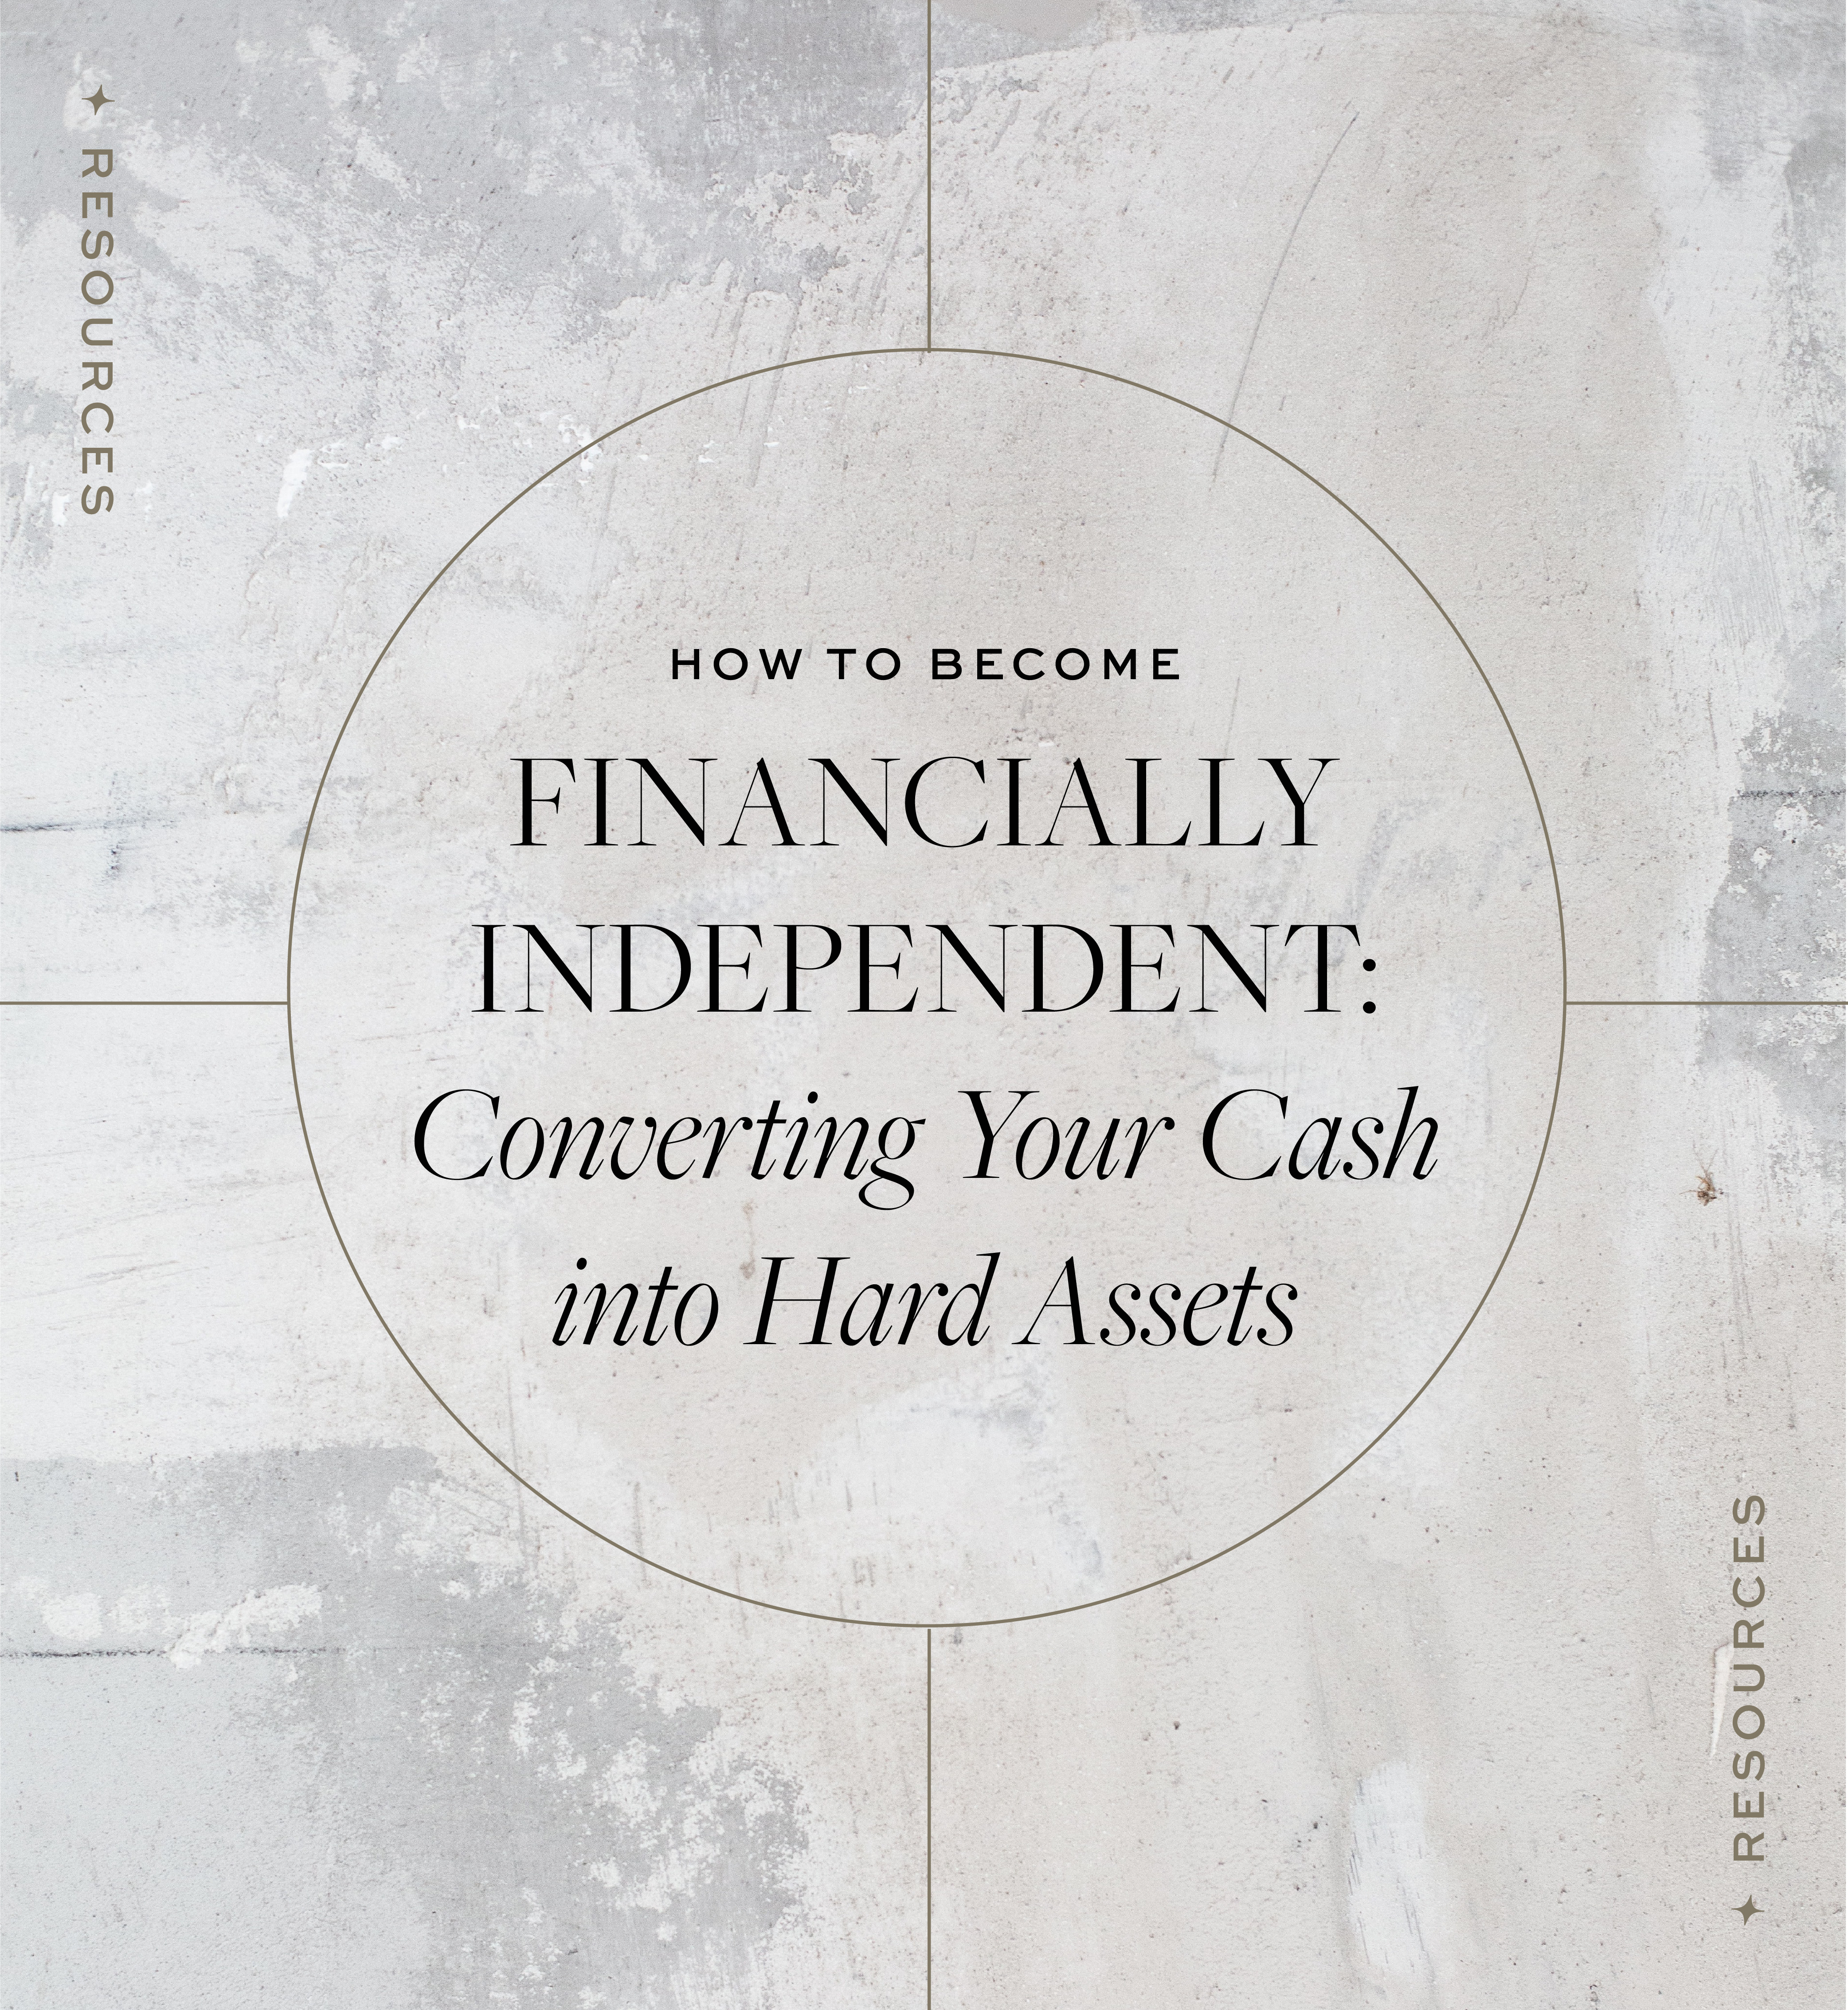 Blog Post: How To Become Financially Independent: Converting Your Cash Into Hard Assets